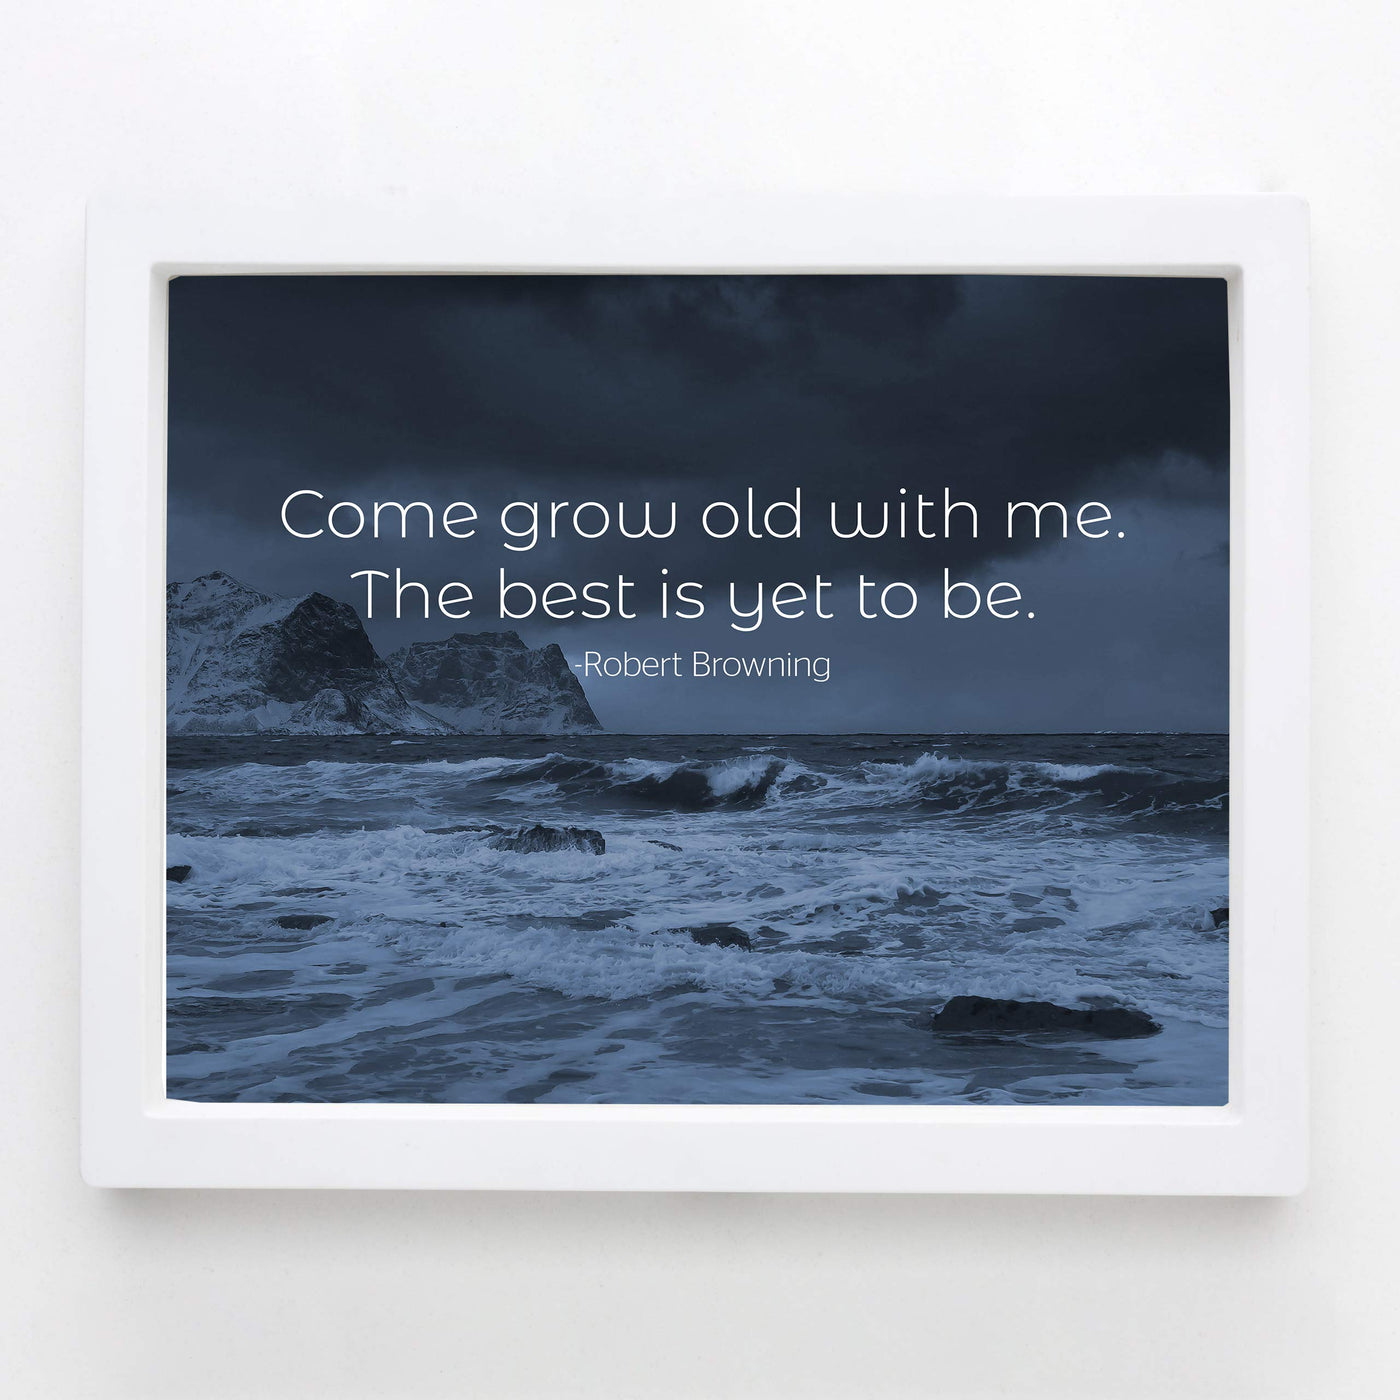 Come Grow Old With Me-The Best Is Yet To Be Poetic Quotes Wall Art -10x8" Inspirational Wall Print-Ready to Frame. Quote By Robert Browning. Scenic Print for Home-Study Decor. Great Literary Gift!